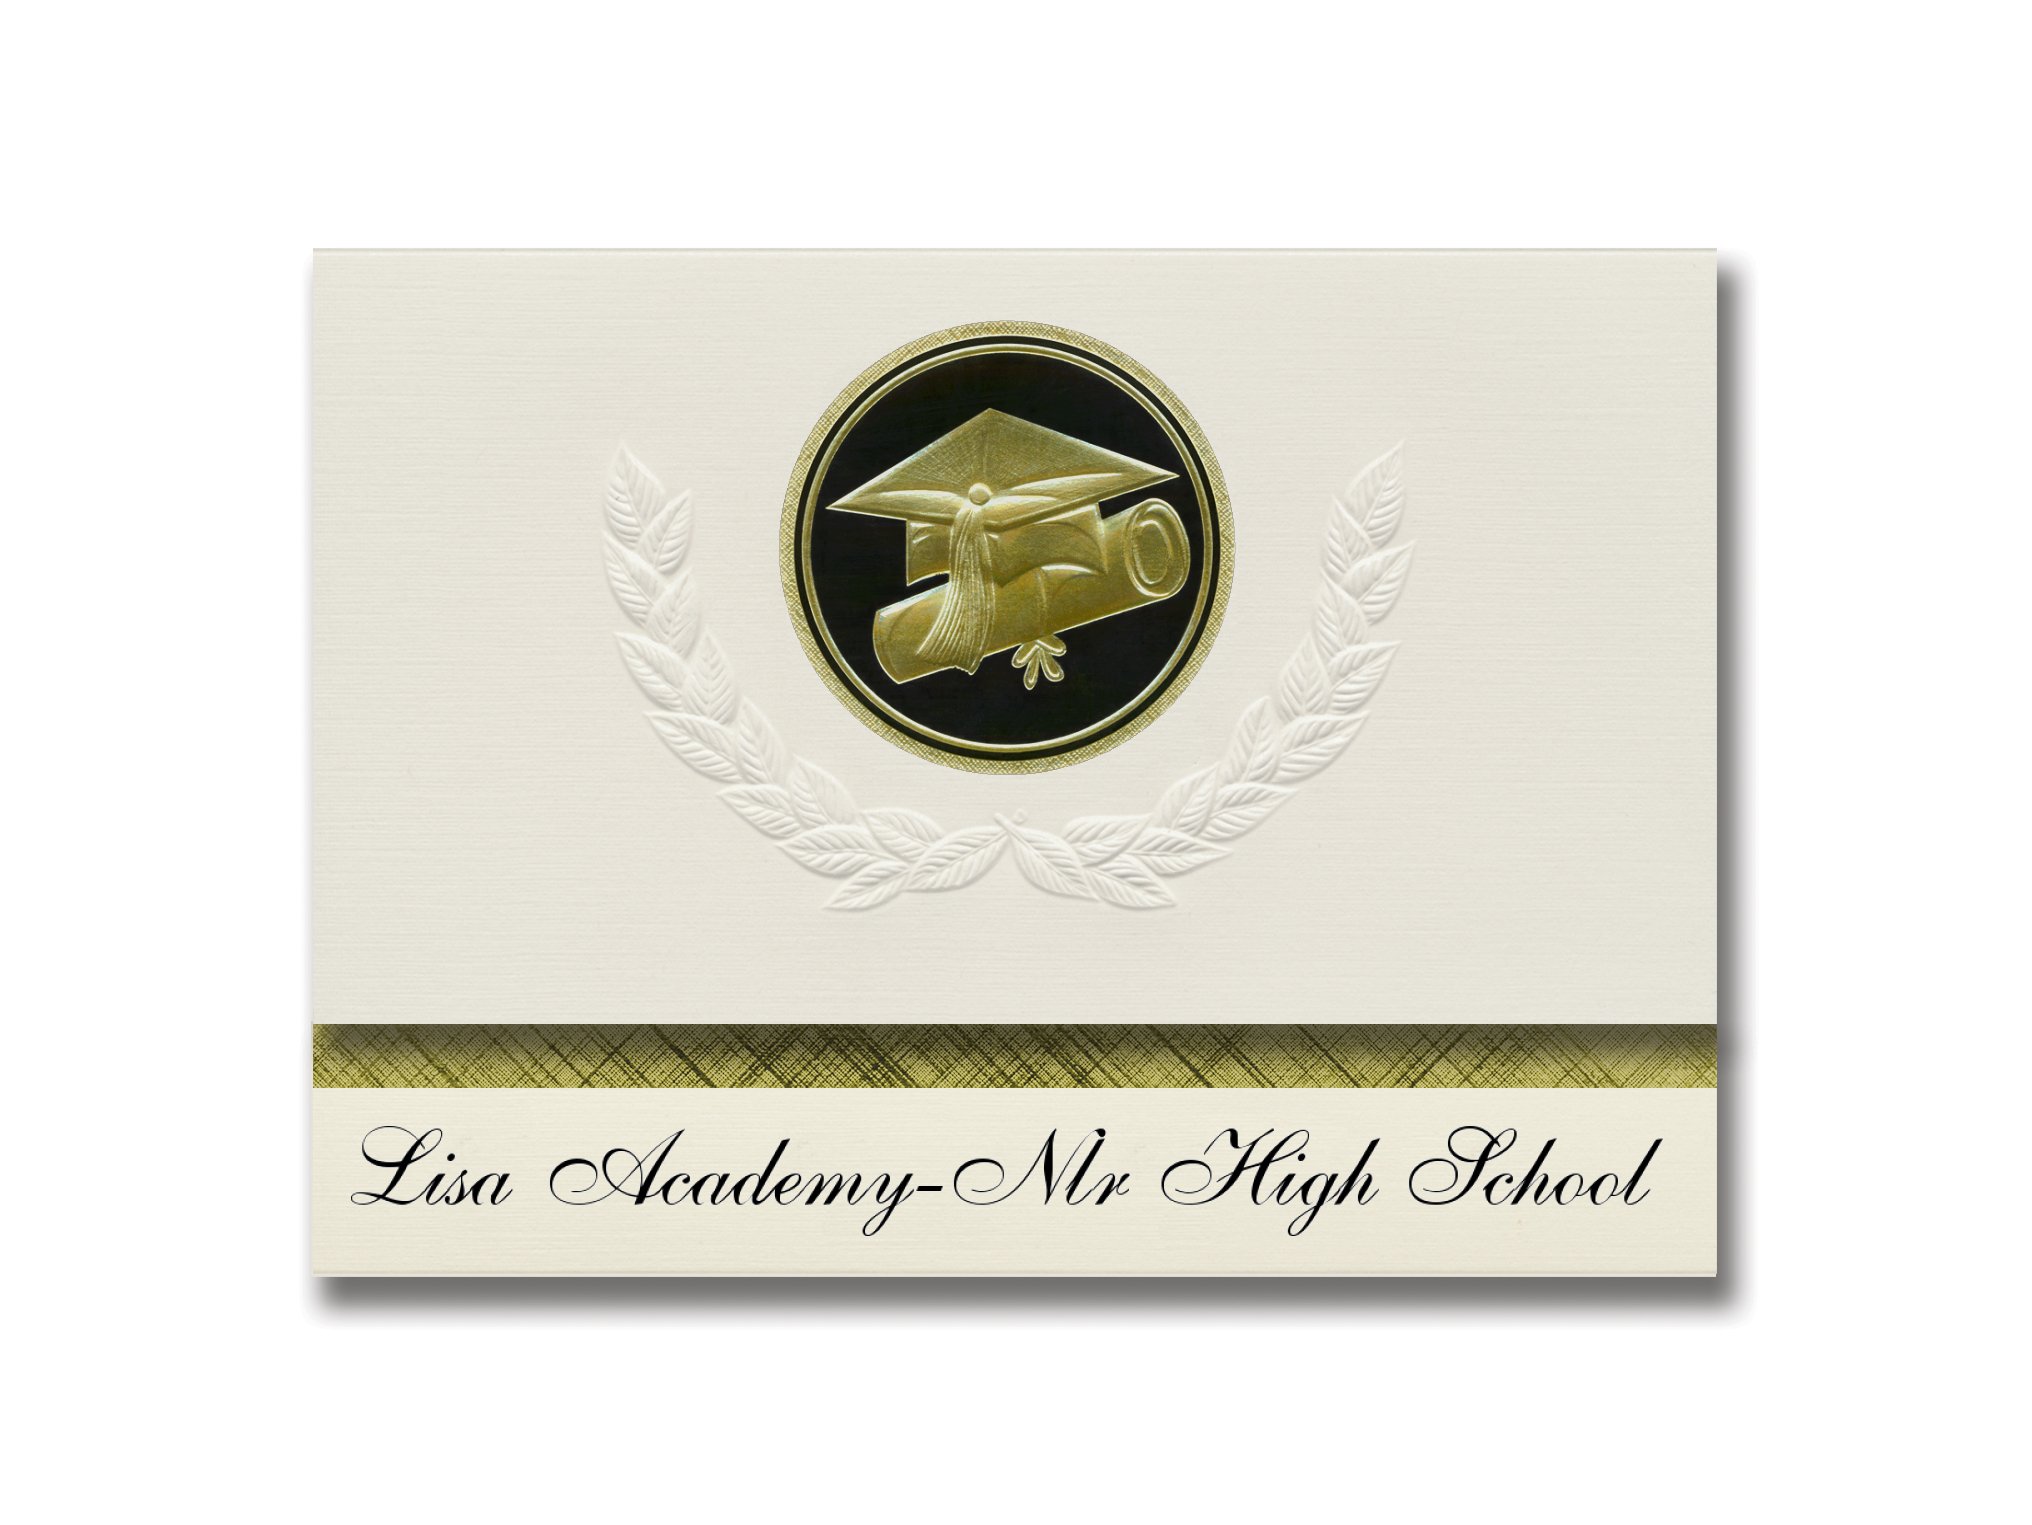 Signature Announcements Lisa Academy-Nlr High School (Sherwood, AR) Graduation Announcements, Presidential style, Elite package of 25 Cap & Diploma...